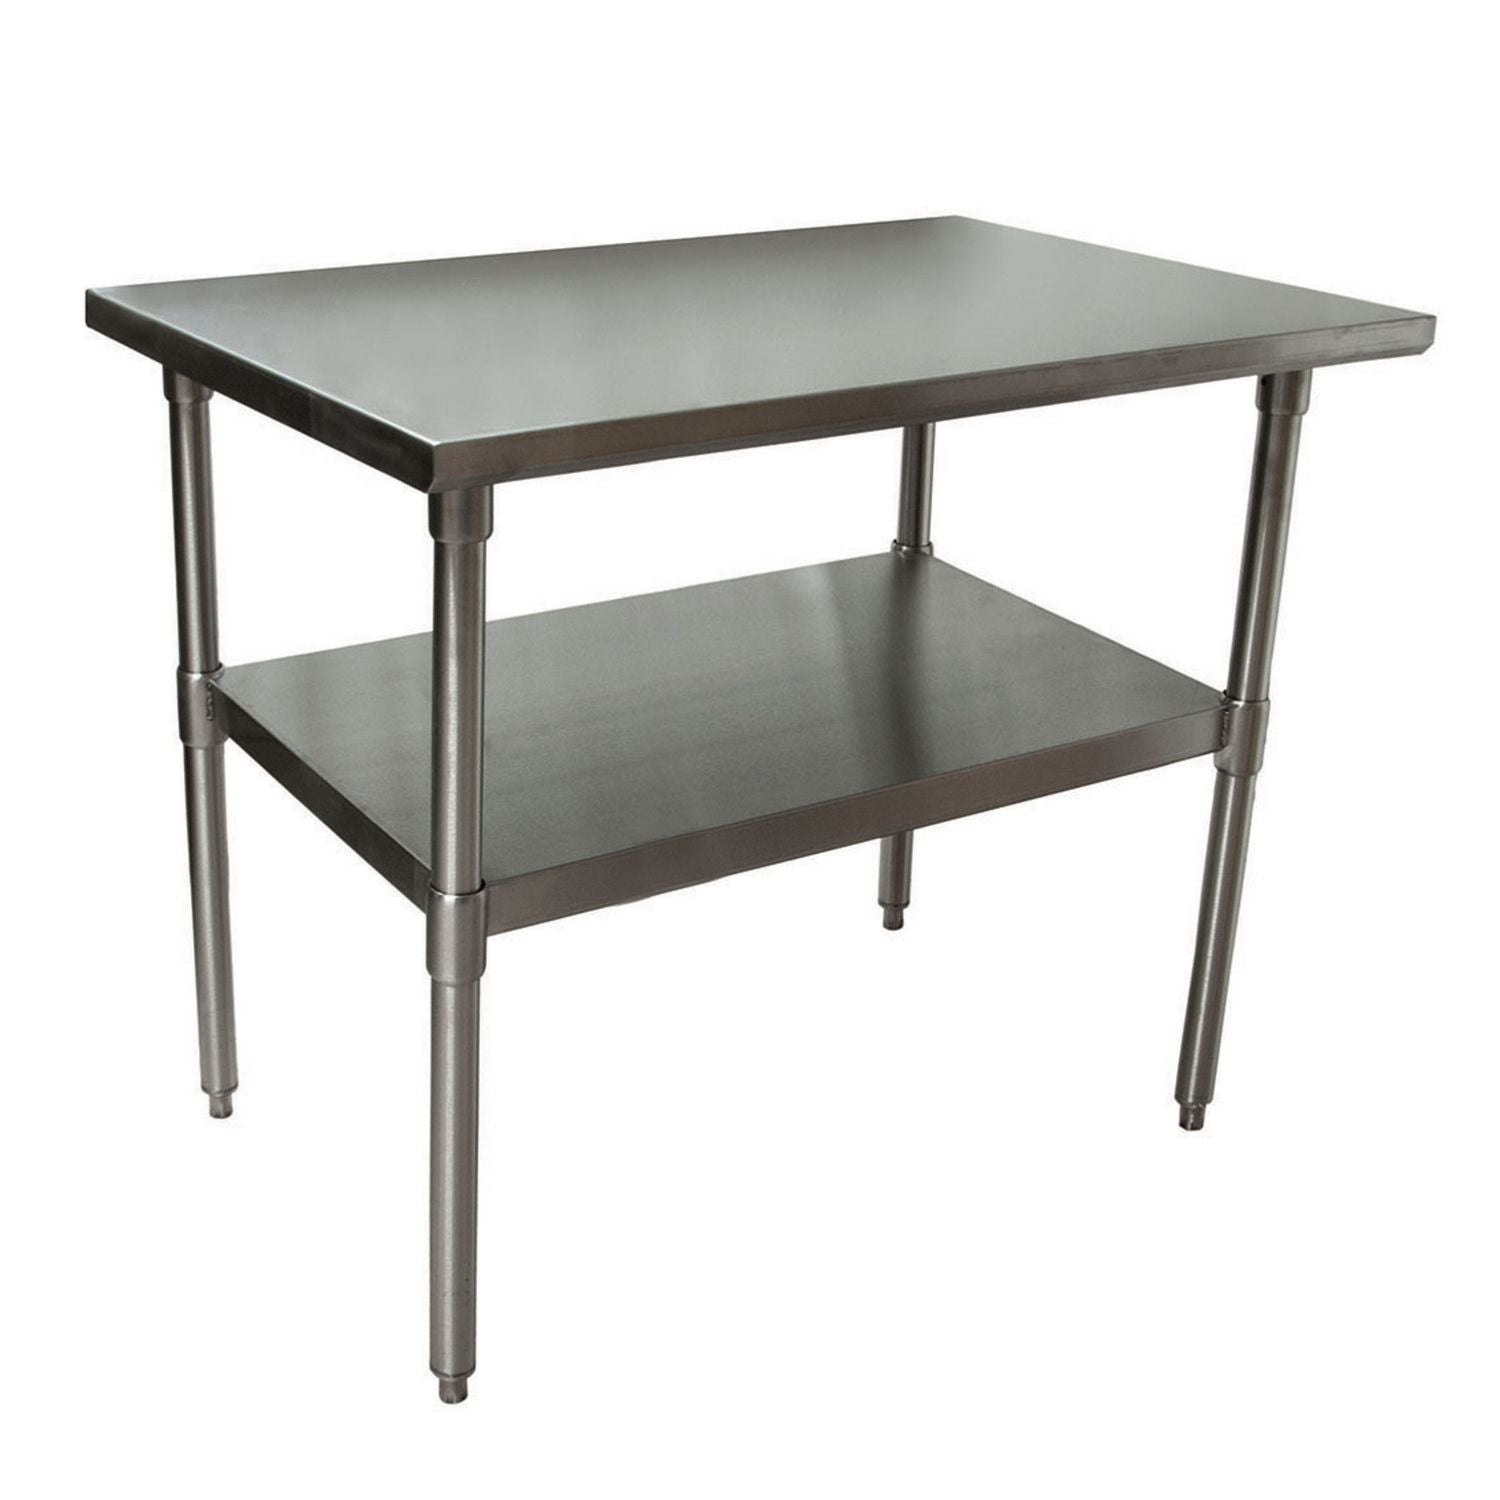 stainless-steel-flat-top-work-tables-48w-x-30d-x-36h-silver-2-pallet-ships-in-4-6-business-days_bke2vt4830 - 2